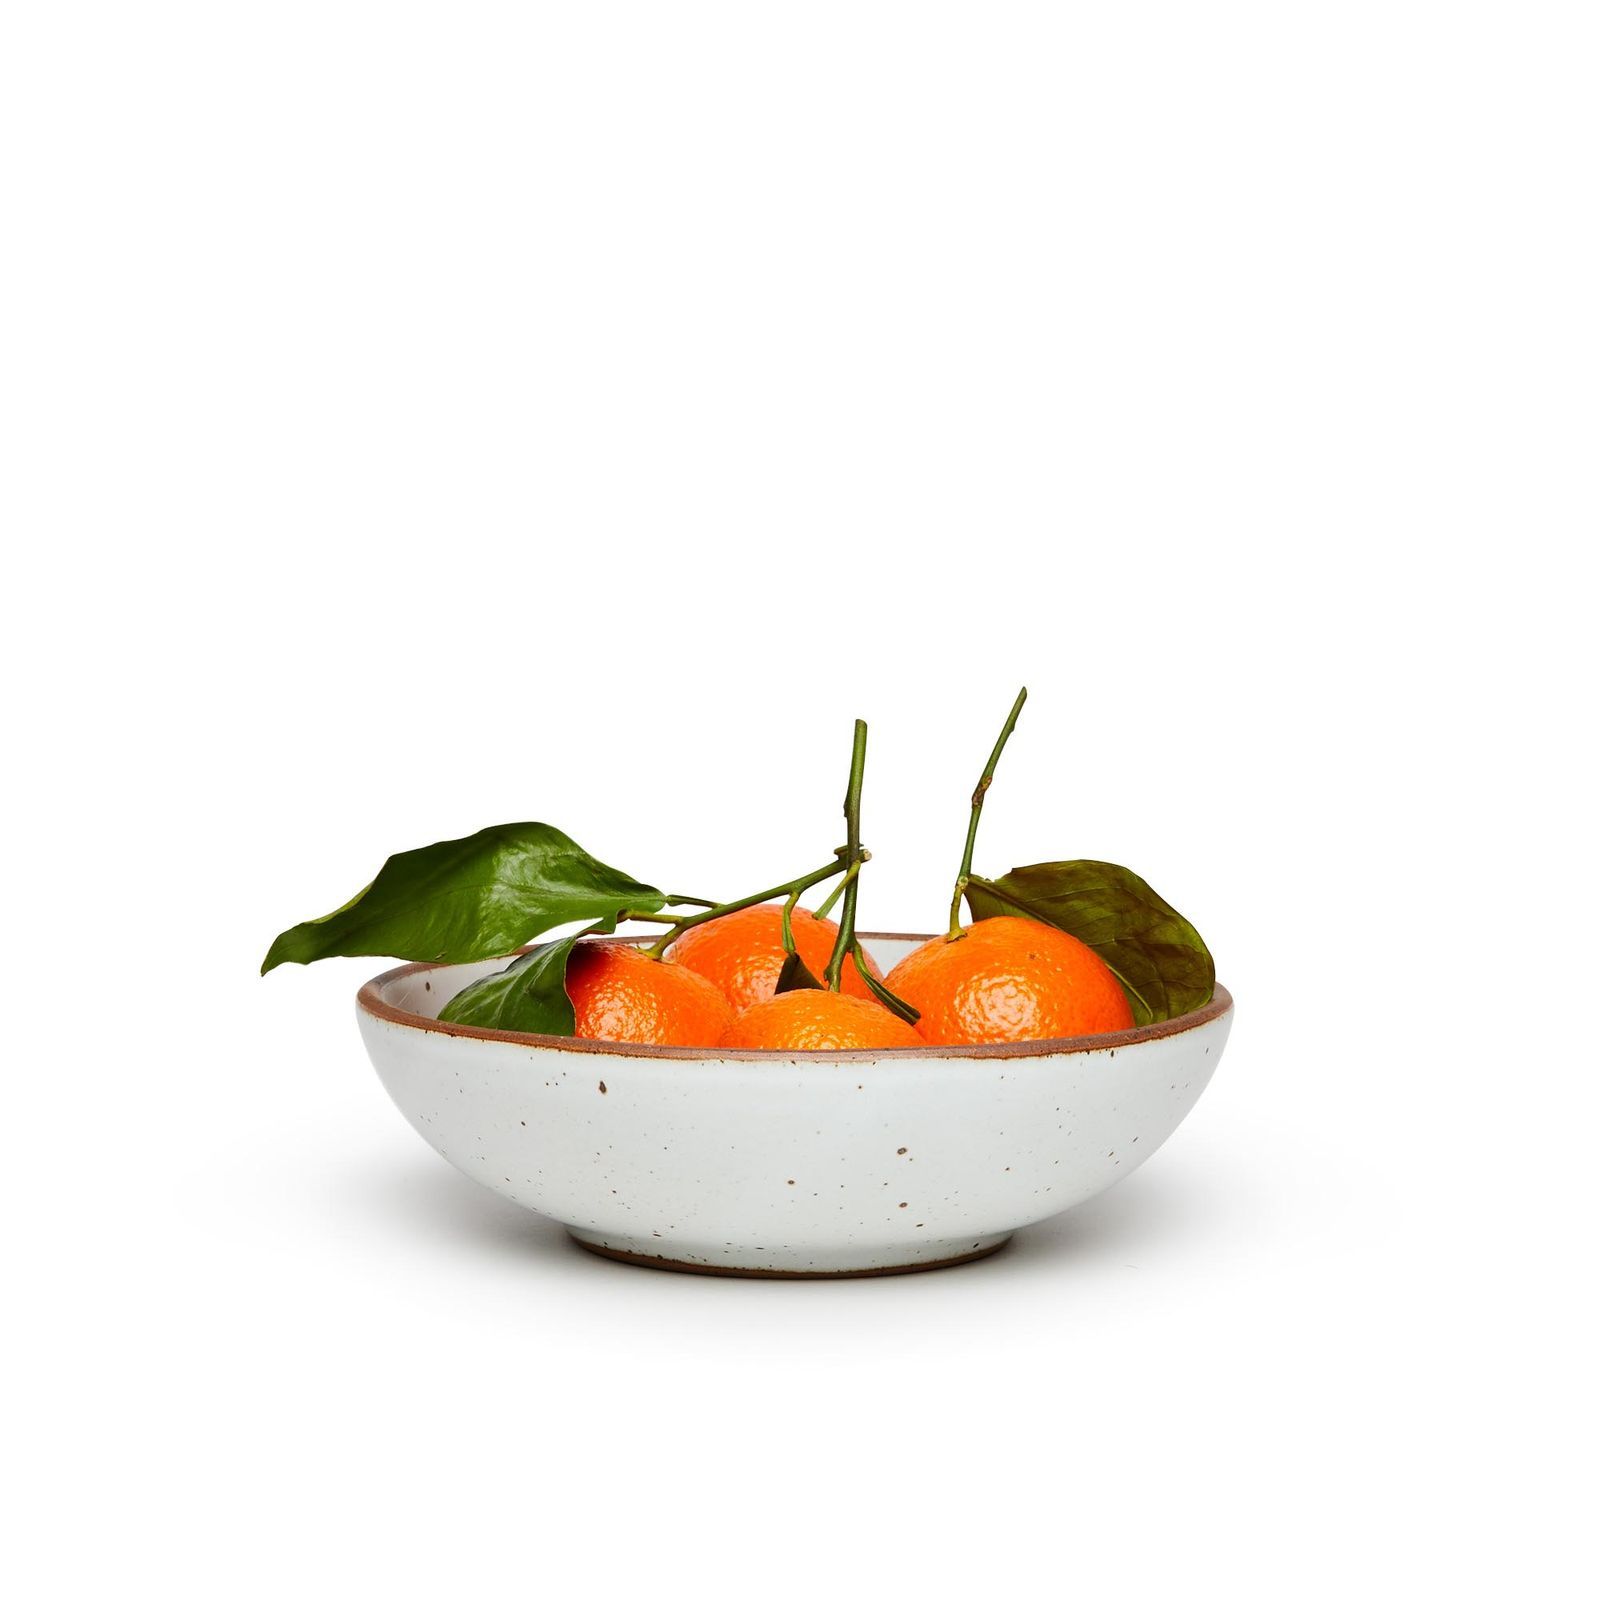 A blueish-white bowl, comfortably holding four small oranges with their leaves and stems still attached.